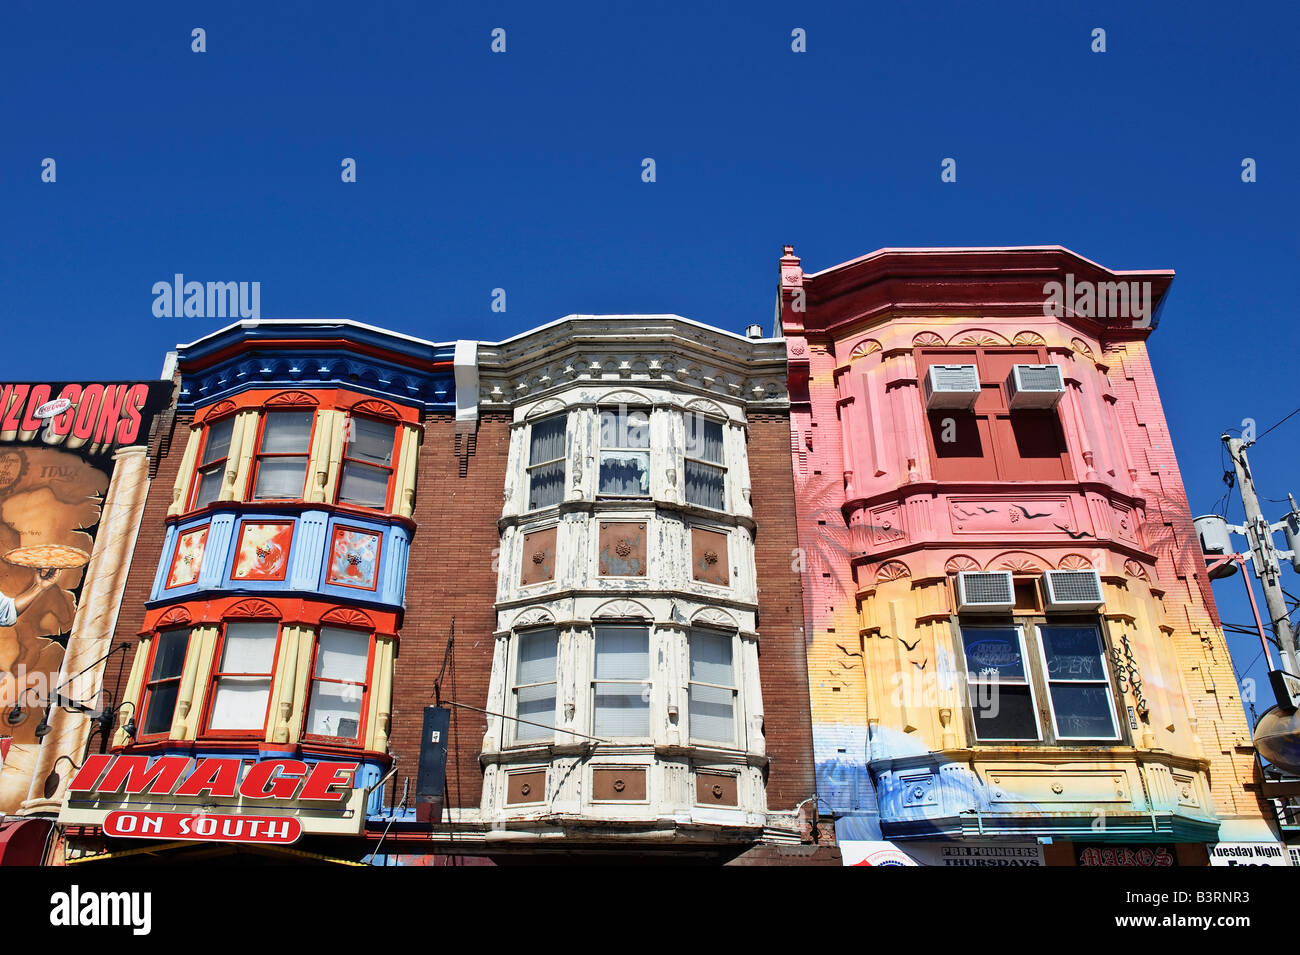 Colorful shop buildings located on South Street the trendy area of Philadelphia Pennsylvania Stock Photo